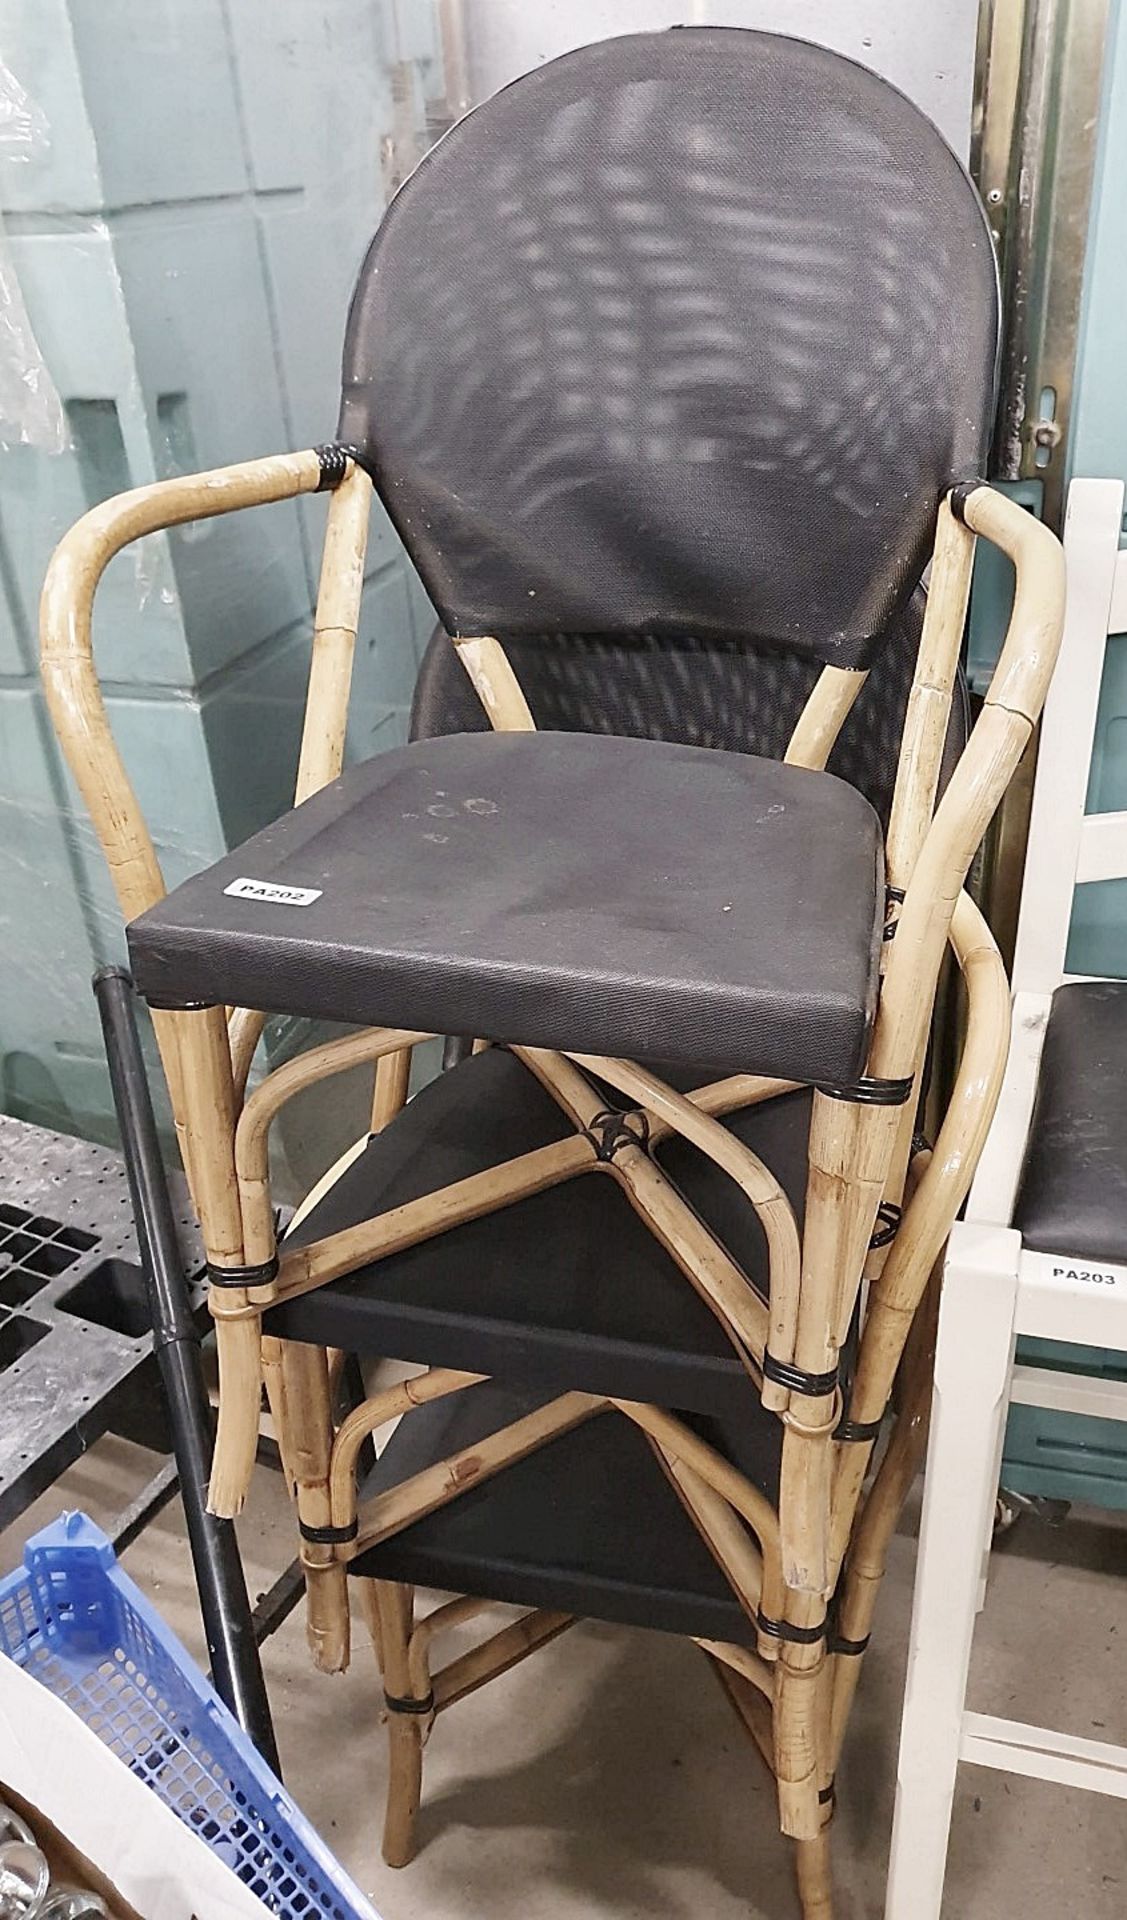 5 x Bamboo Studio Chairs With Black Seat and Back Rest - Dimensions: H44/88 x W54 x D39 cms